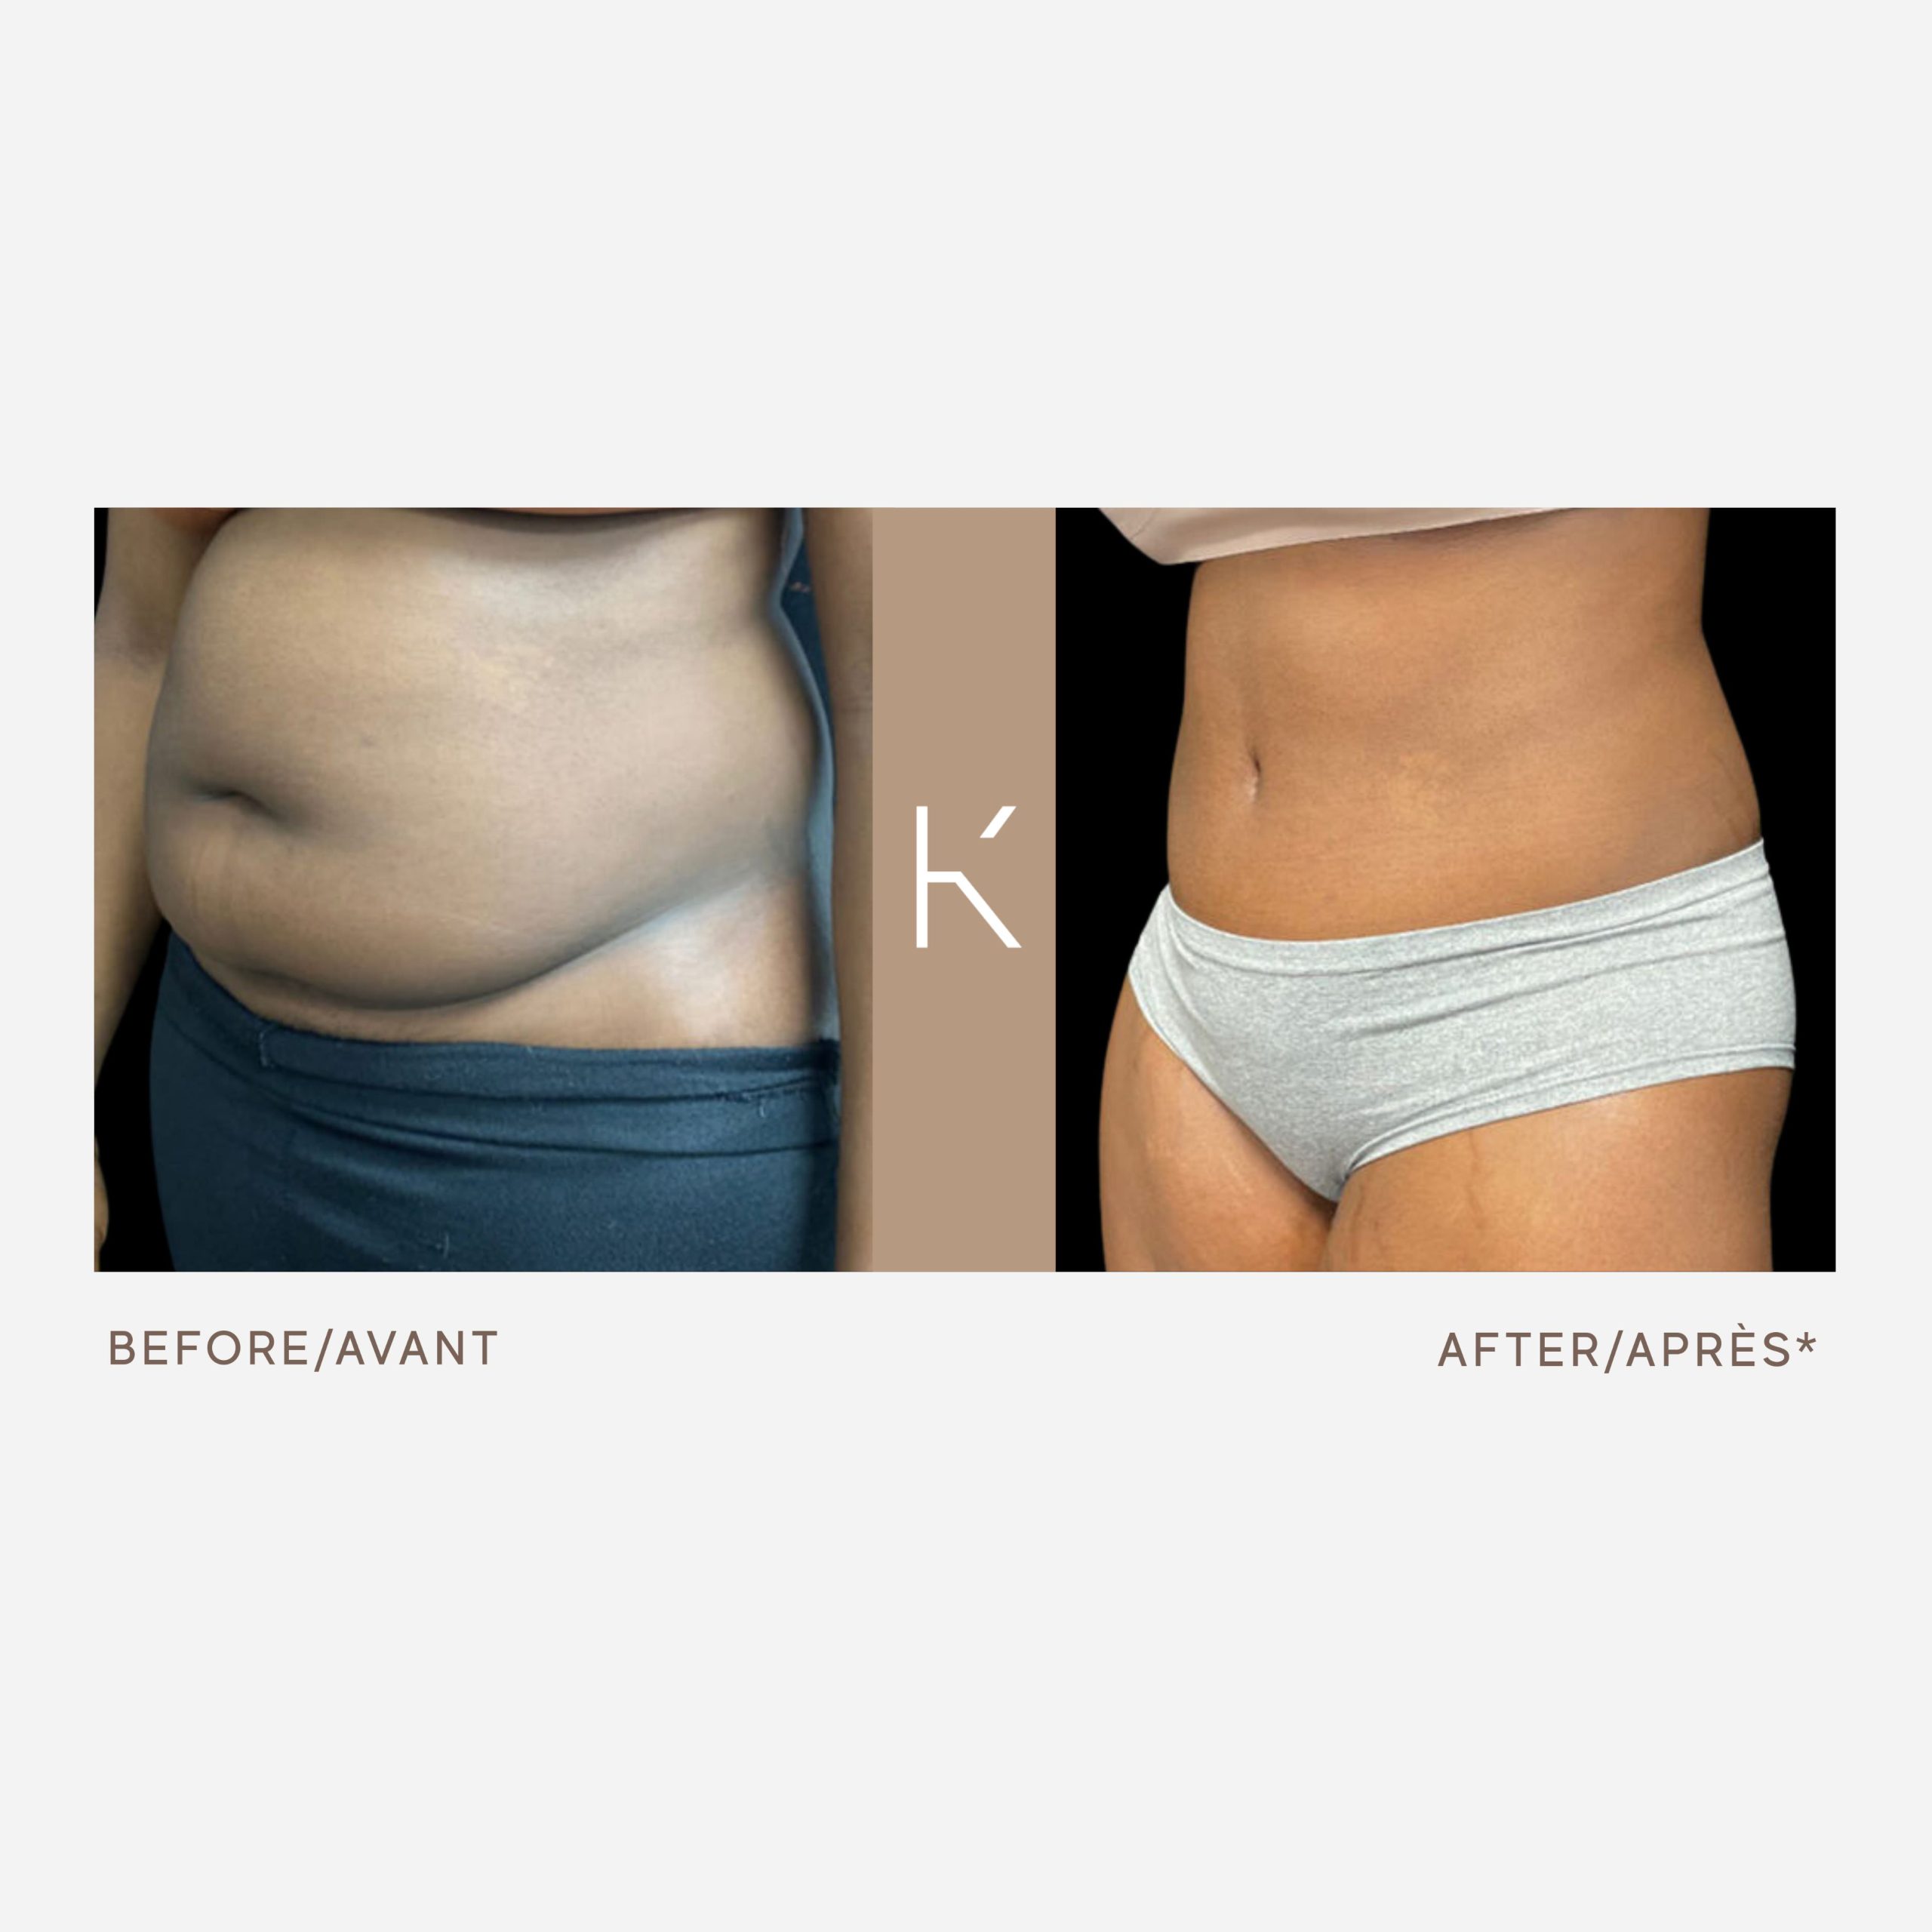 Patient K - 4 weeks Post-Operative Tummy Tuck and Sub-muscular